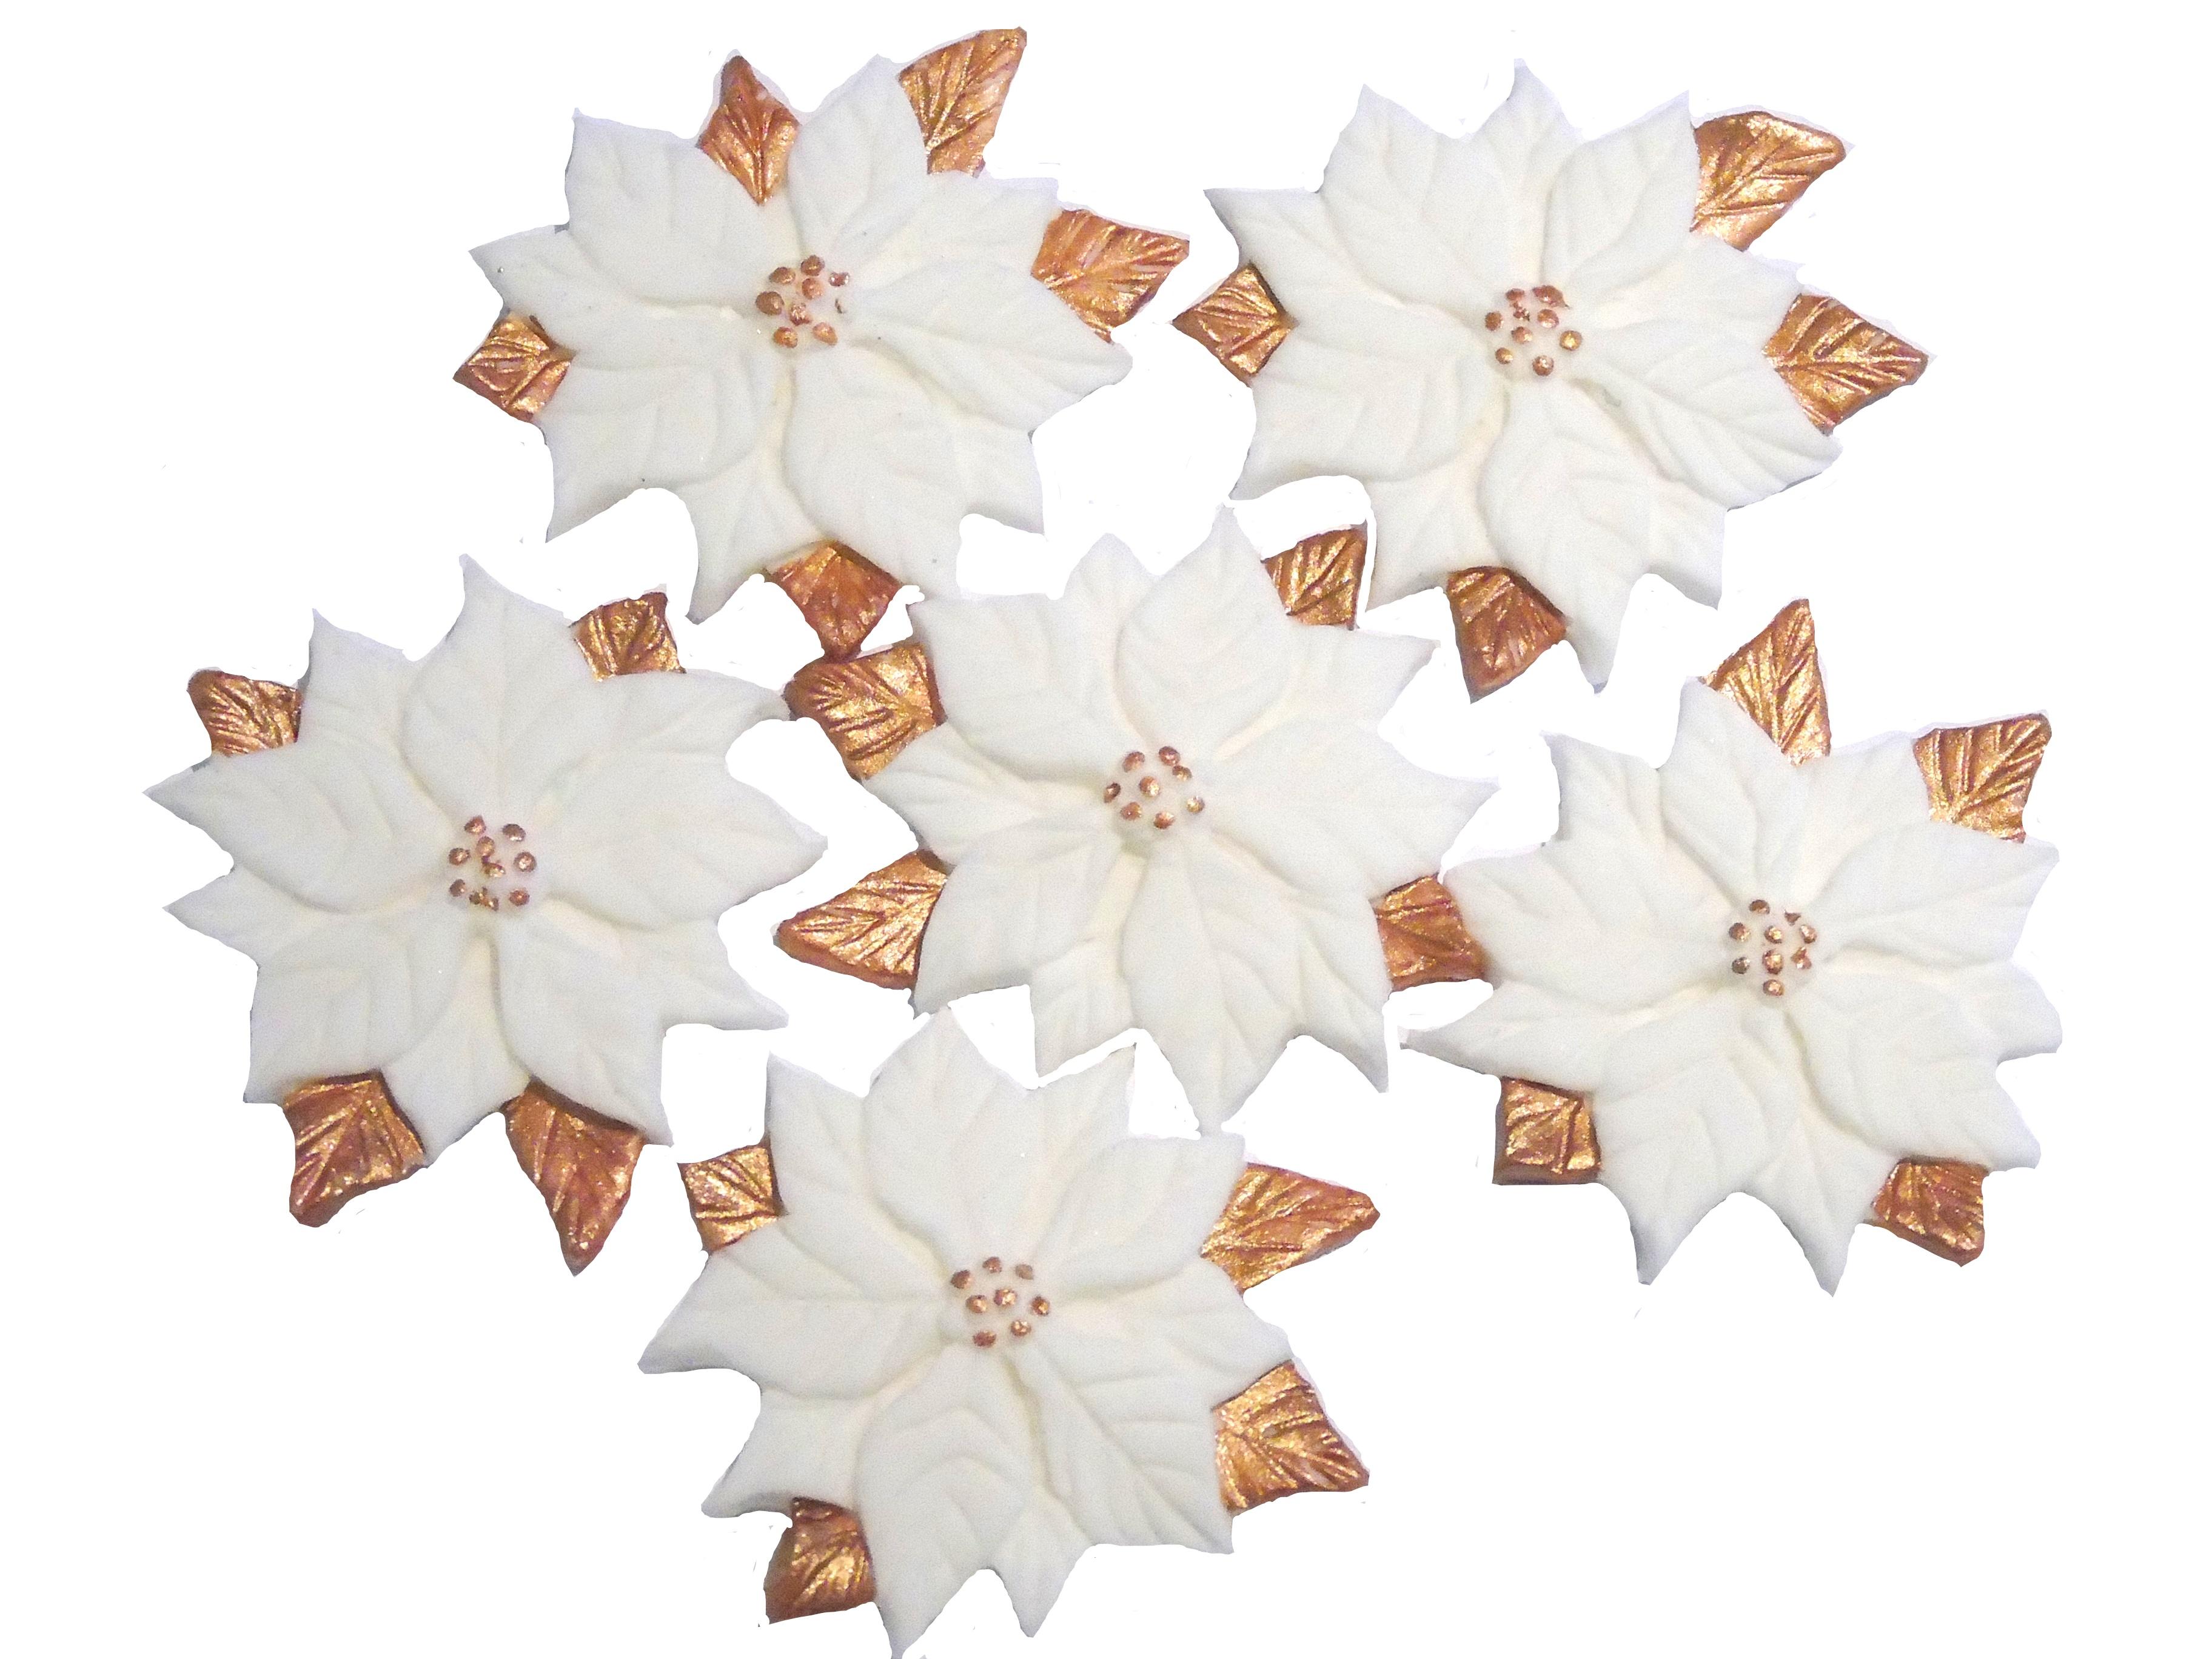 6 White Poinsettia Edible Flowers Vegan Cupcake Toppers Cake Decorations